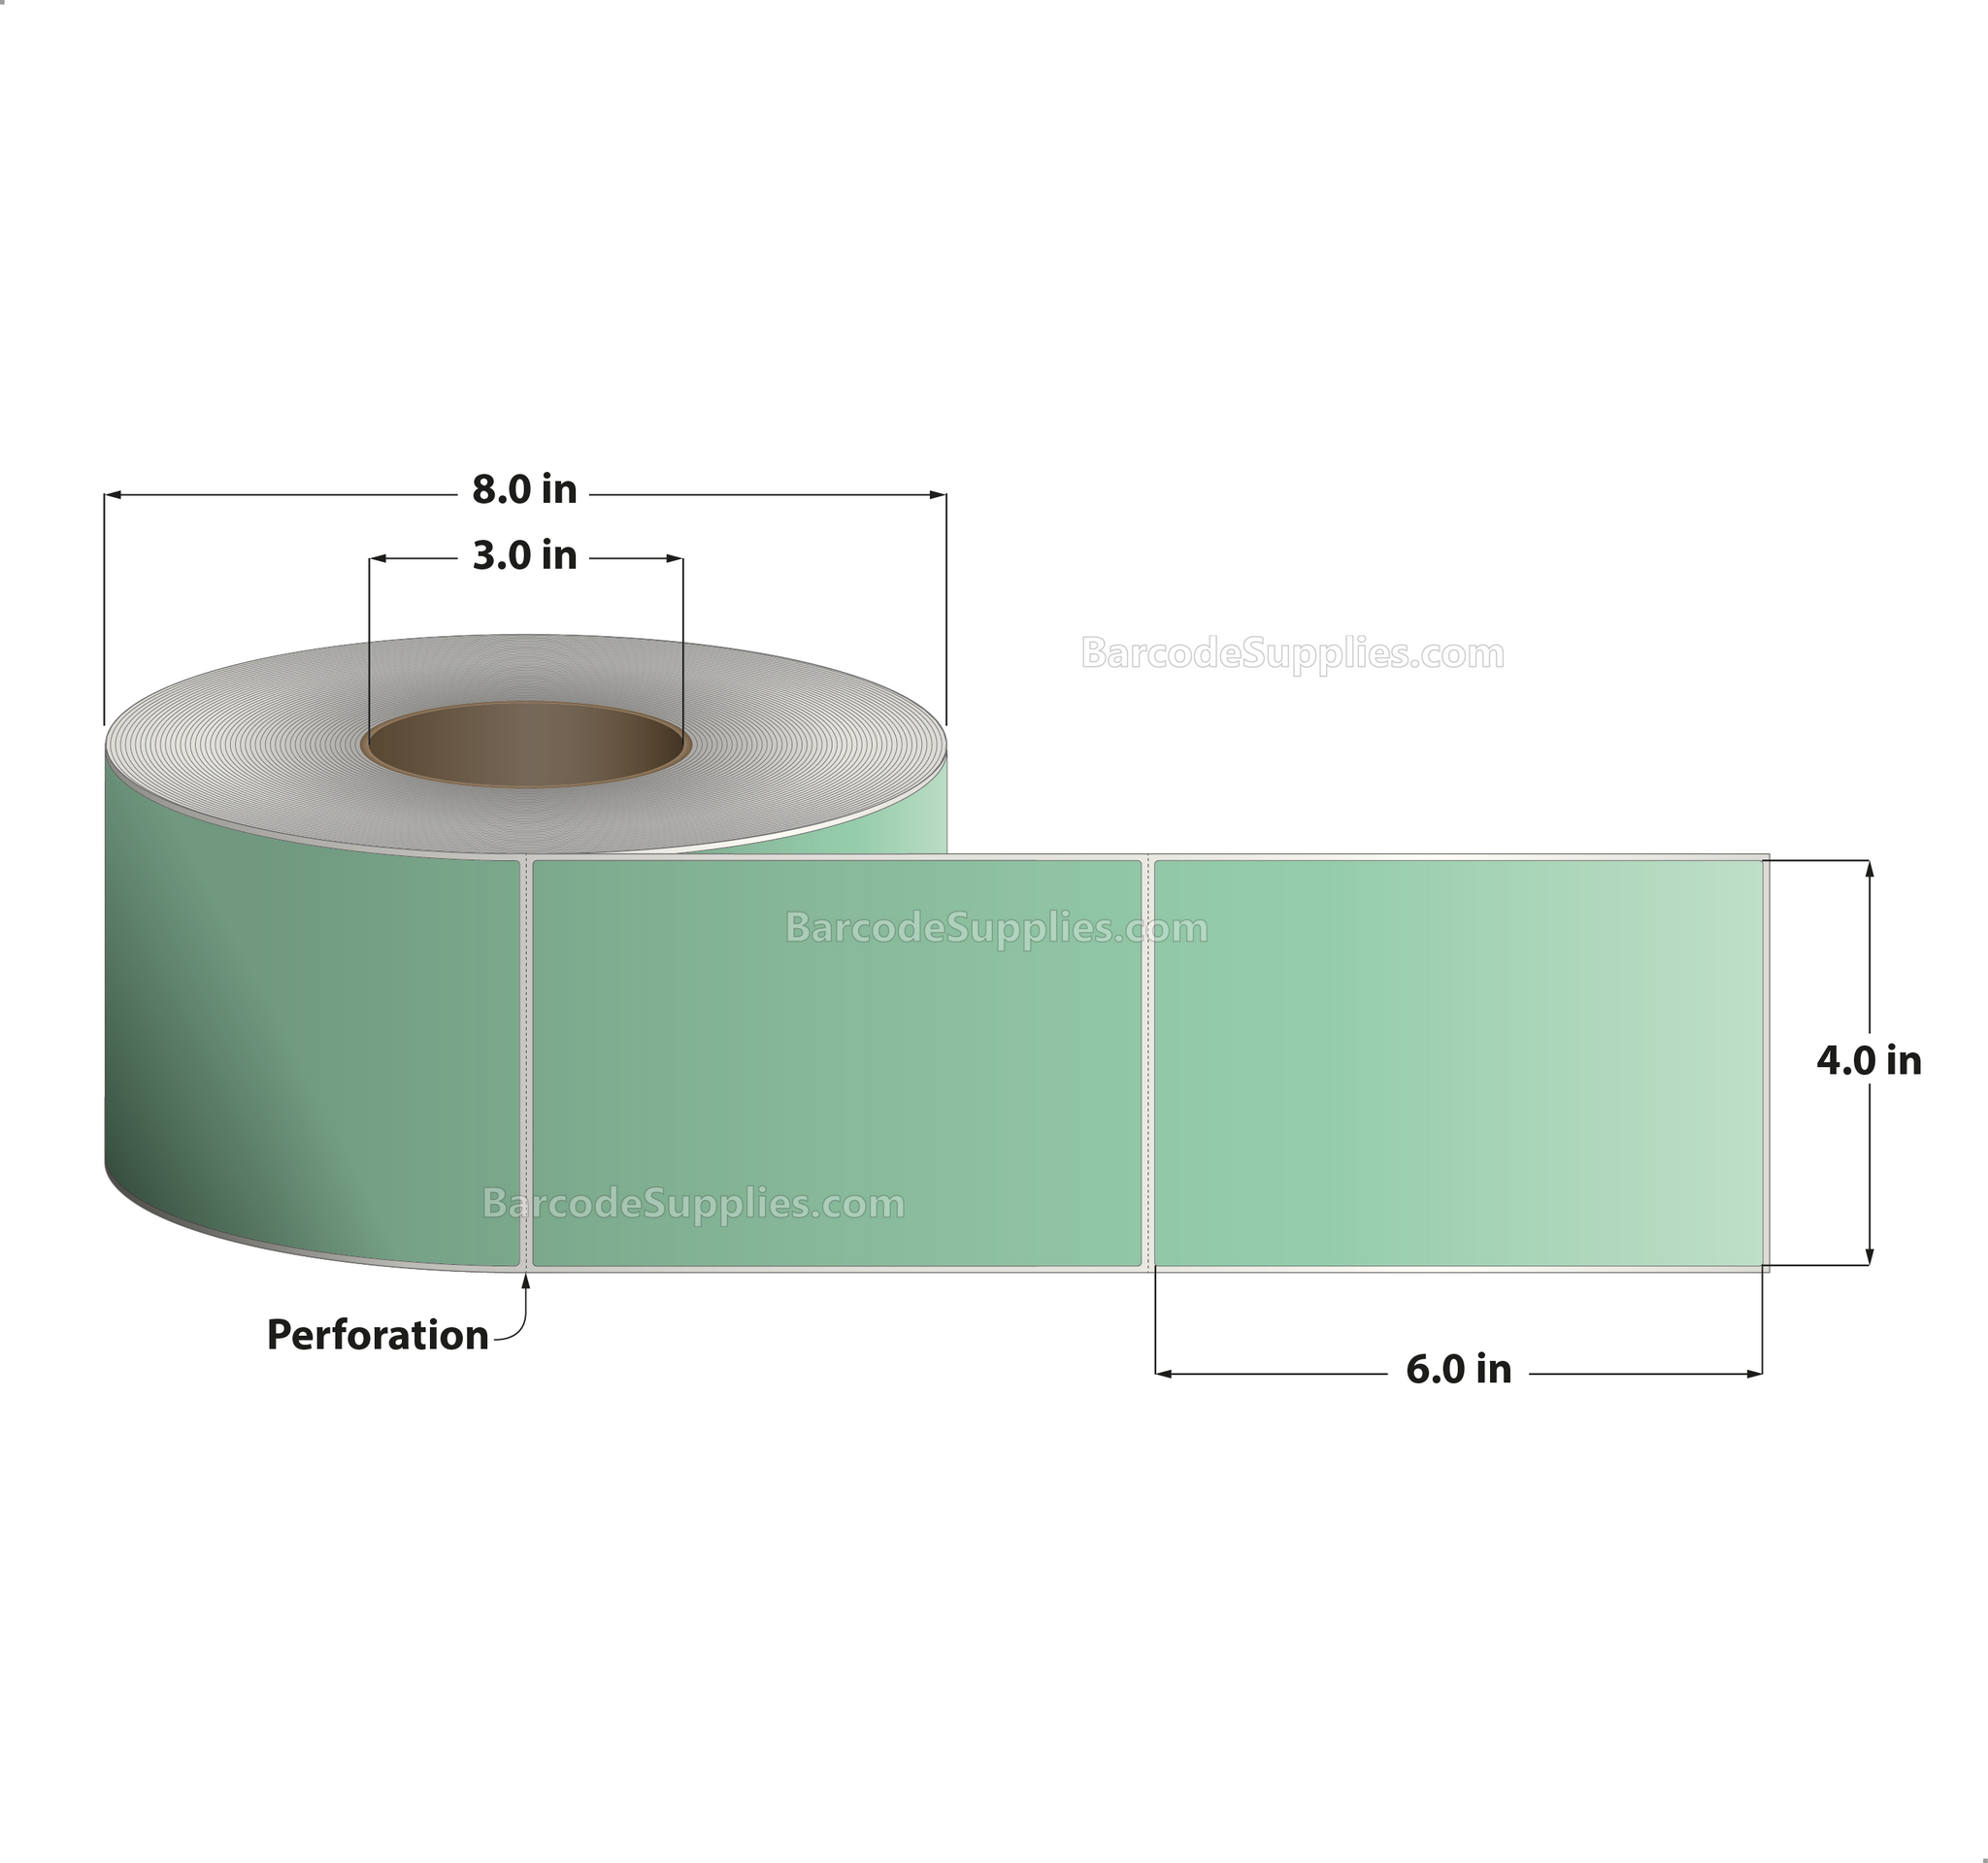 4 x 6 Thermal Transfer 345 Green Labels With Permanent Adhesive - Perforated - 1000 Labels Per Roll - Carton Of 4 Rolls - 4000 Labels Total - MPN: RFC-4-6-1000-GR